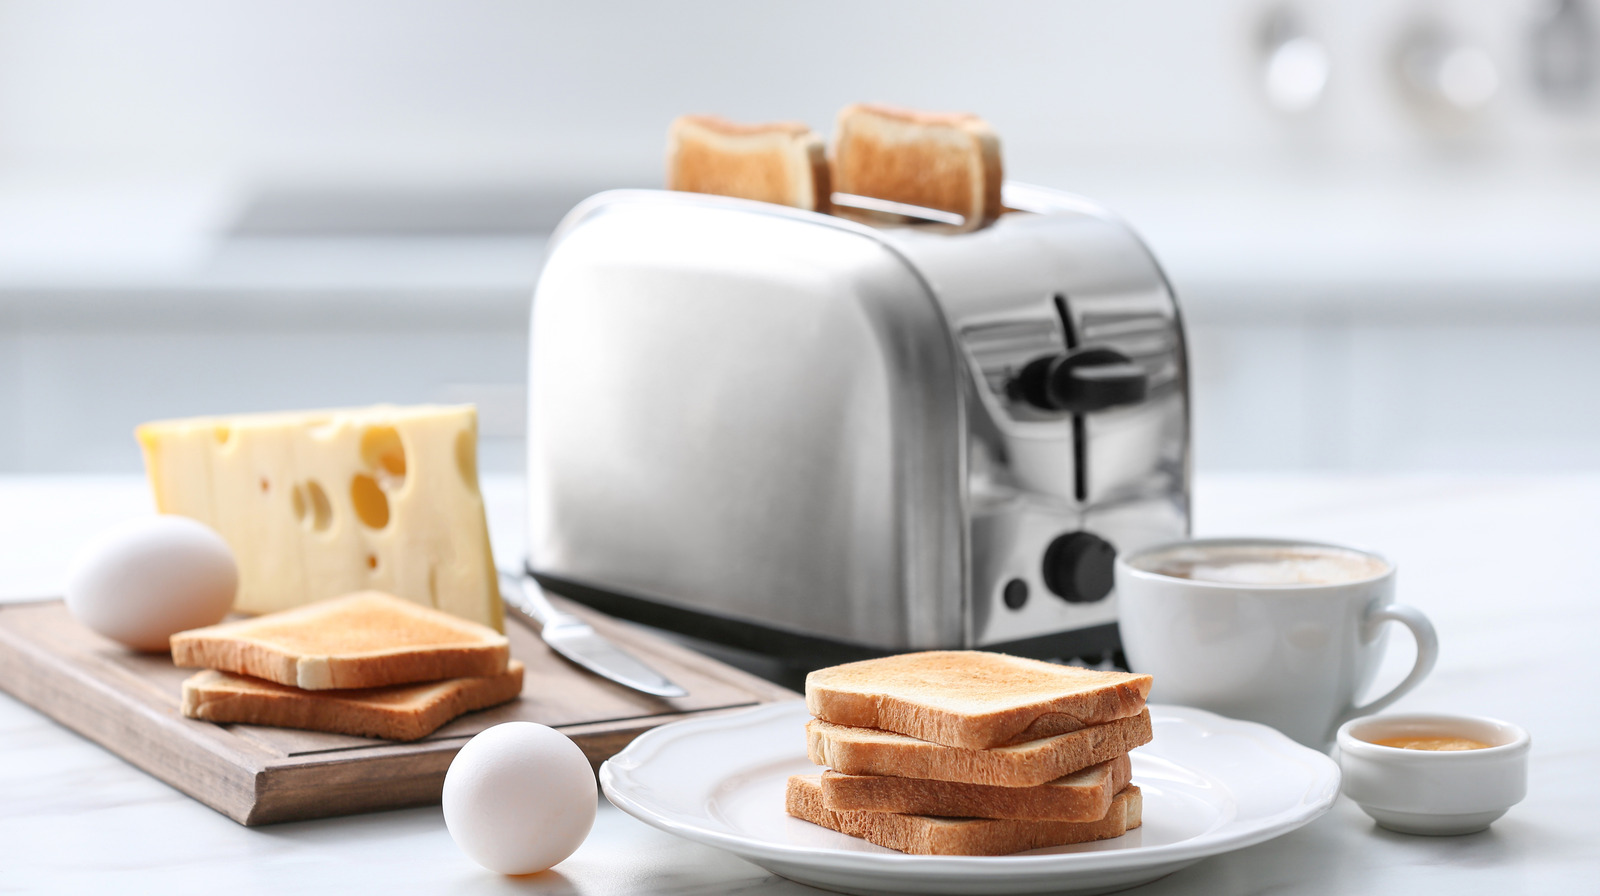 https://www.mashed.com/img/gallery/the-best-toasters-in-2022/l-intro-1656349561.jpg